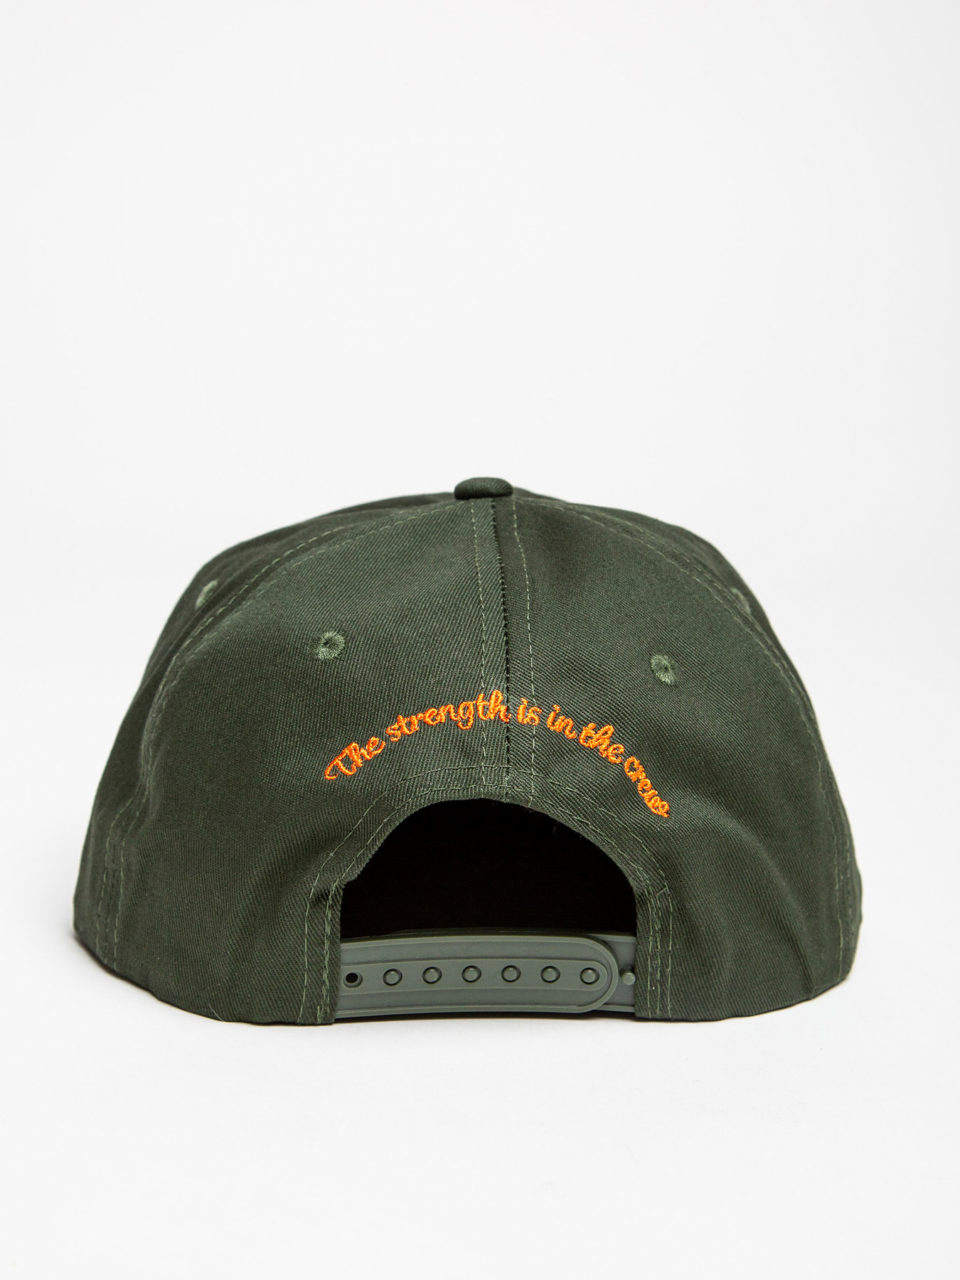 UNINTERRUPTED Limited Edition Hat 